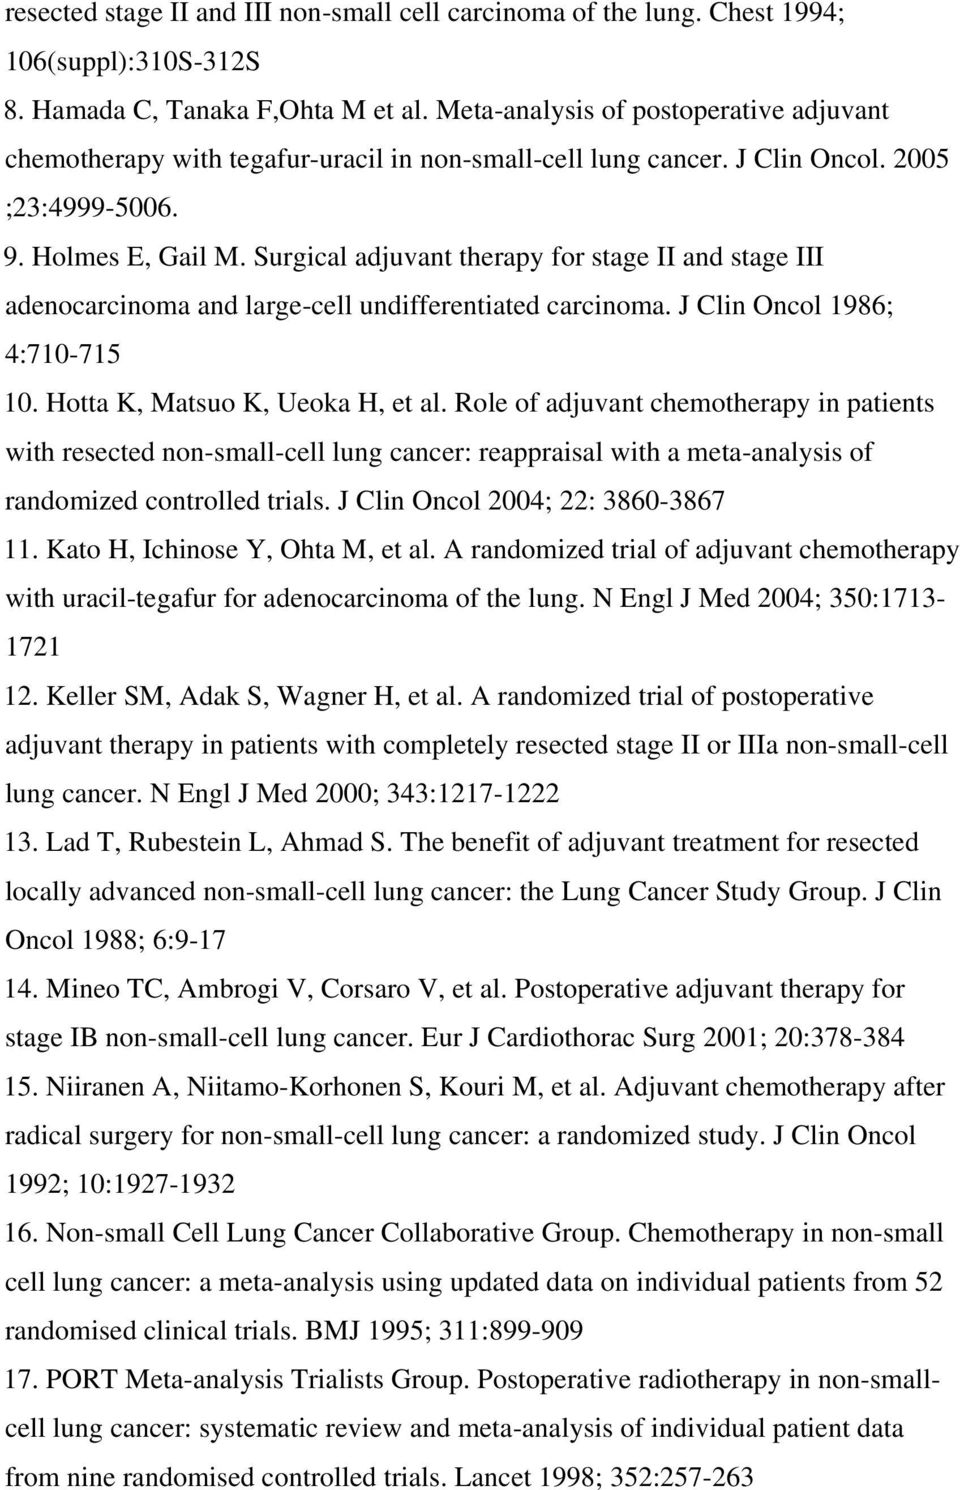 Surgical adjuvant therapy for stage II and stage III adenocarcinoma and large-cell undifferentiated carcinoma. J Clin Oncol 1986; 4:710-715 10. Hotta K, Matsuo K, Ueoka H, et al.